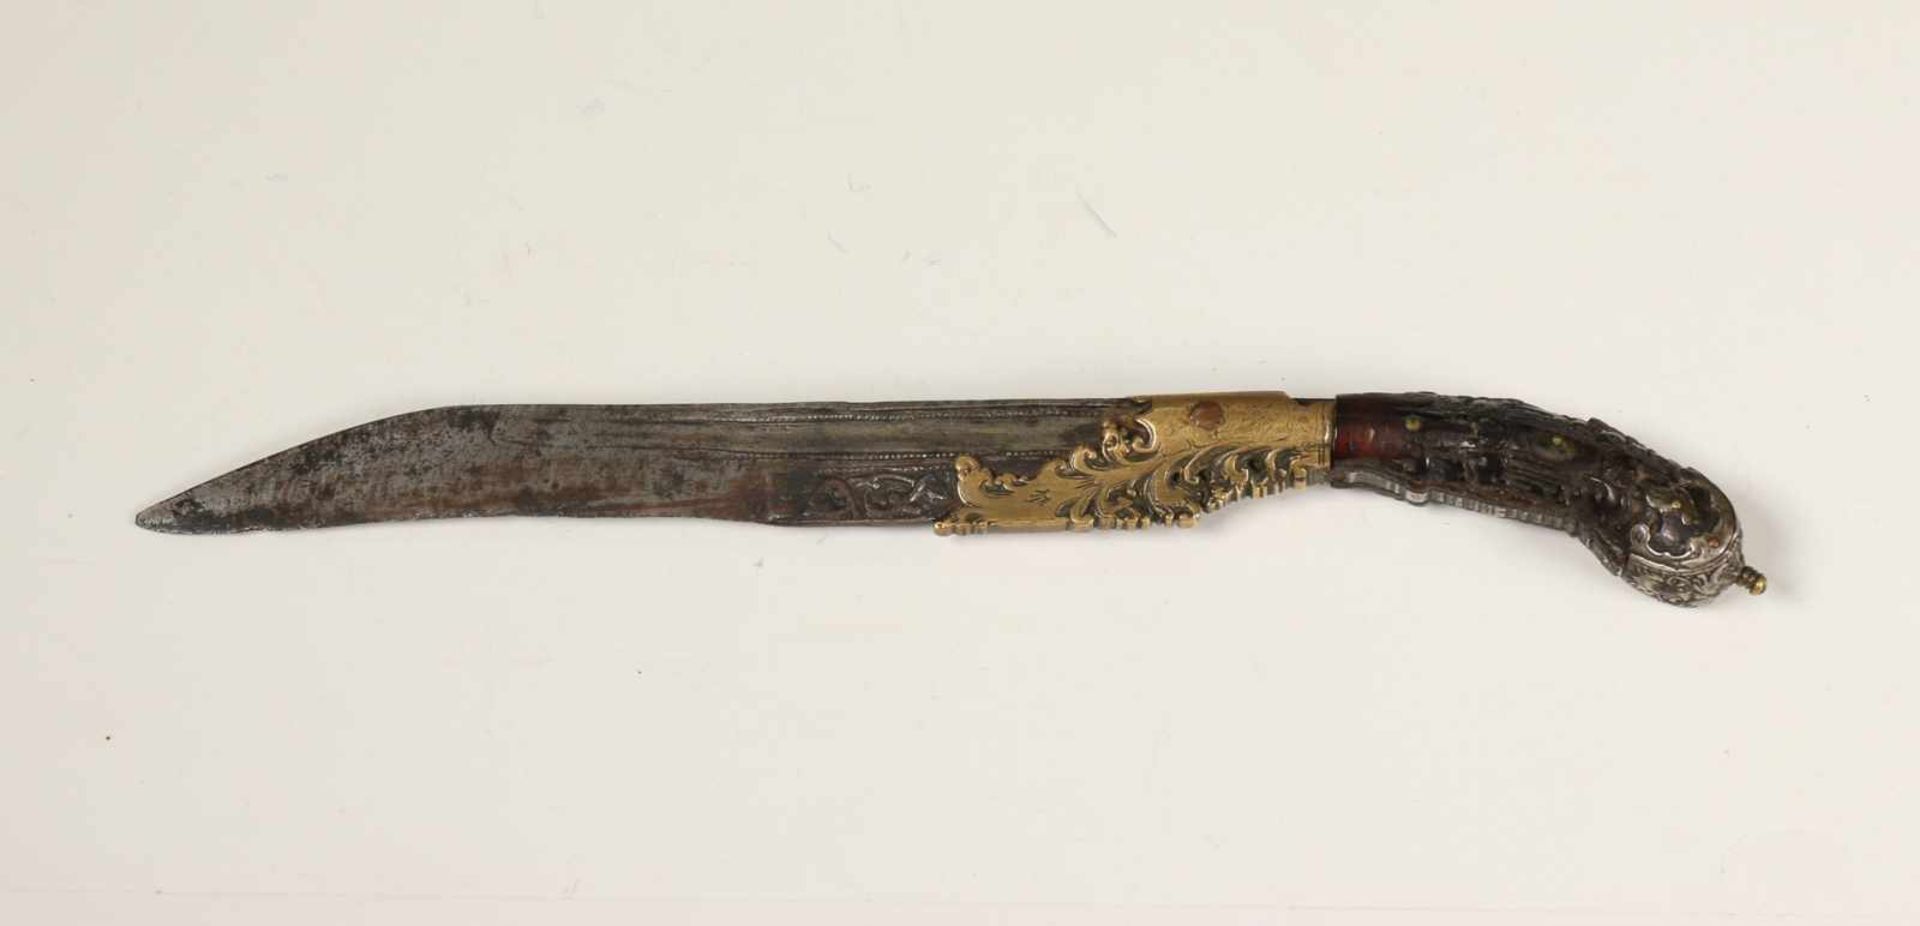 Indonesia, Sumatra, royal dagger, ca. 1900,with finely carved horn handle and details in silver. The - Bild 3 aus 4